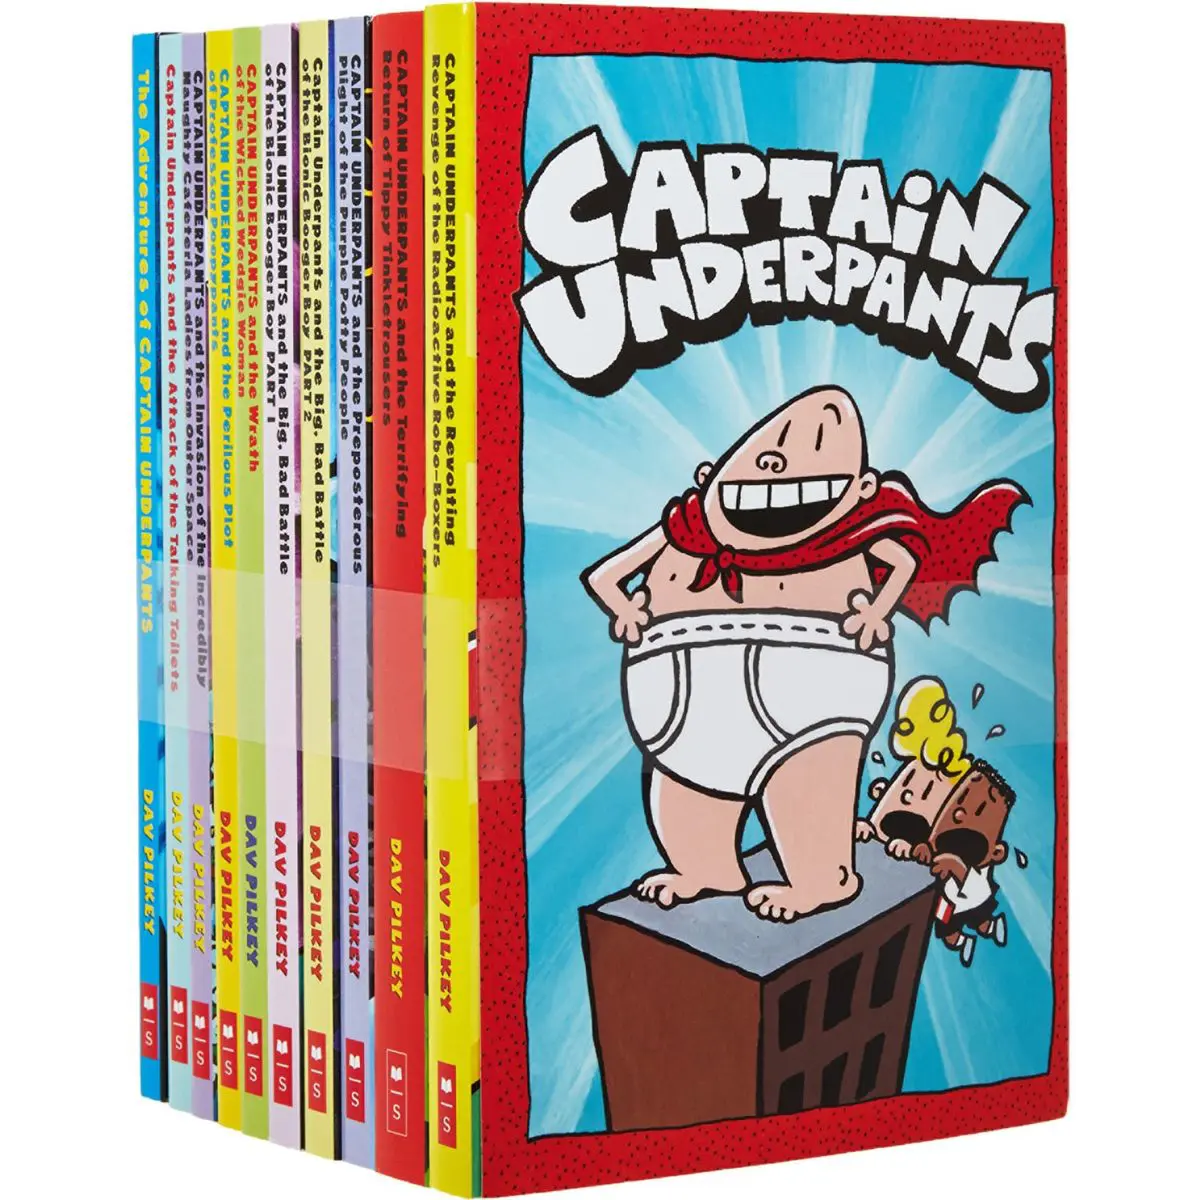 Captain Underpants 10 Book Set - Top Toys and Gifts for Eight Year Old Boys